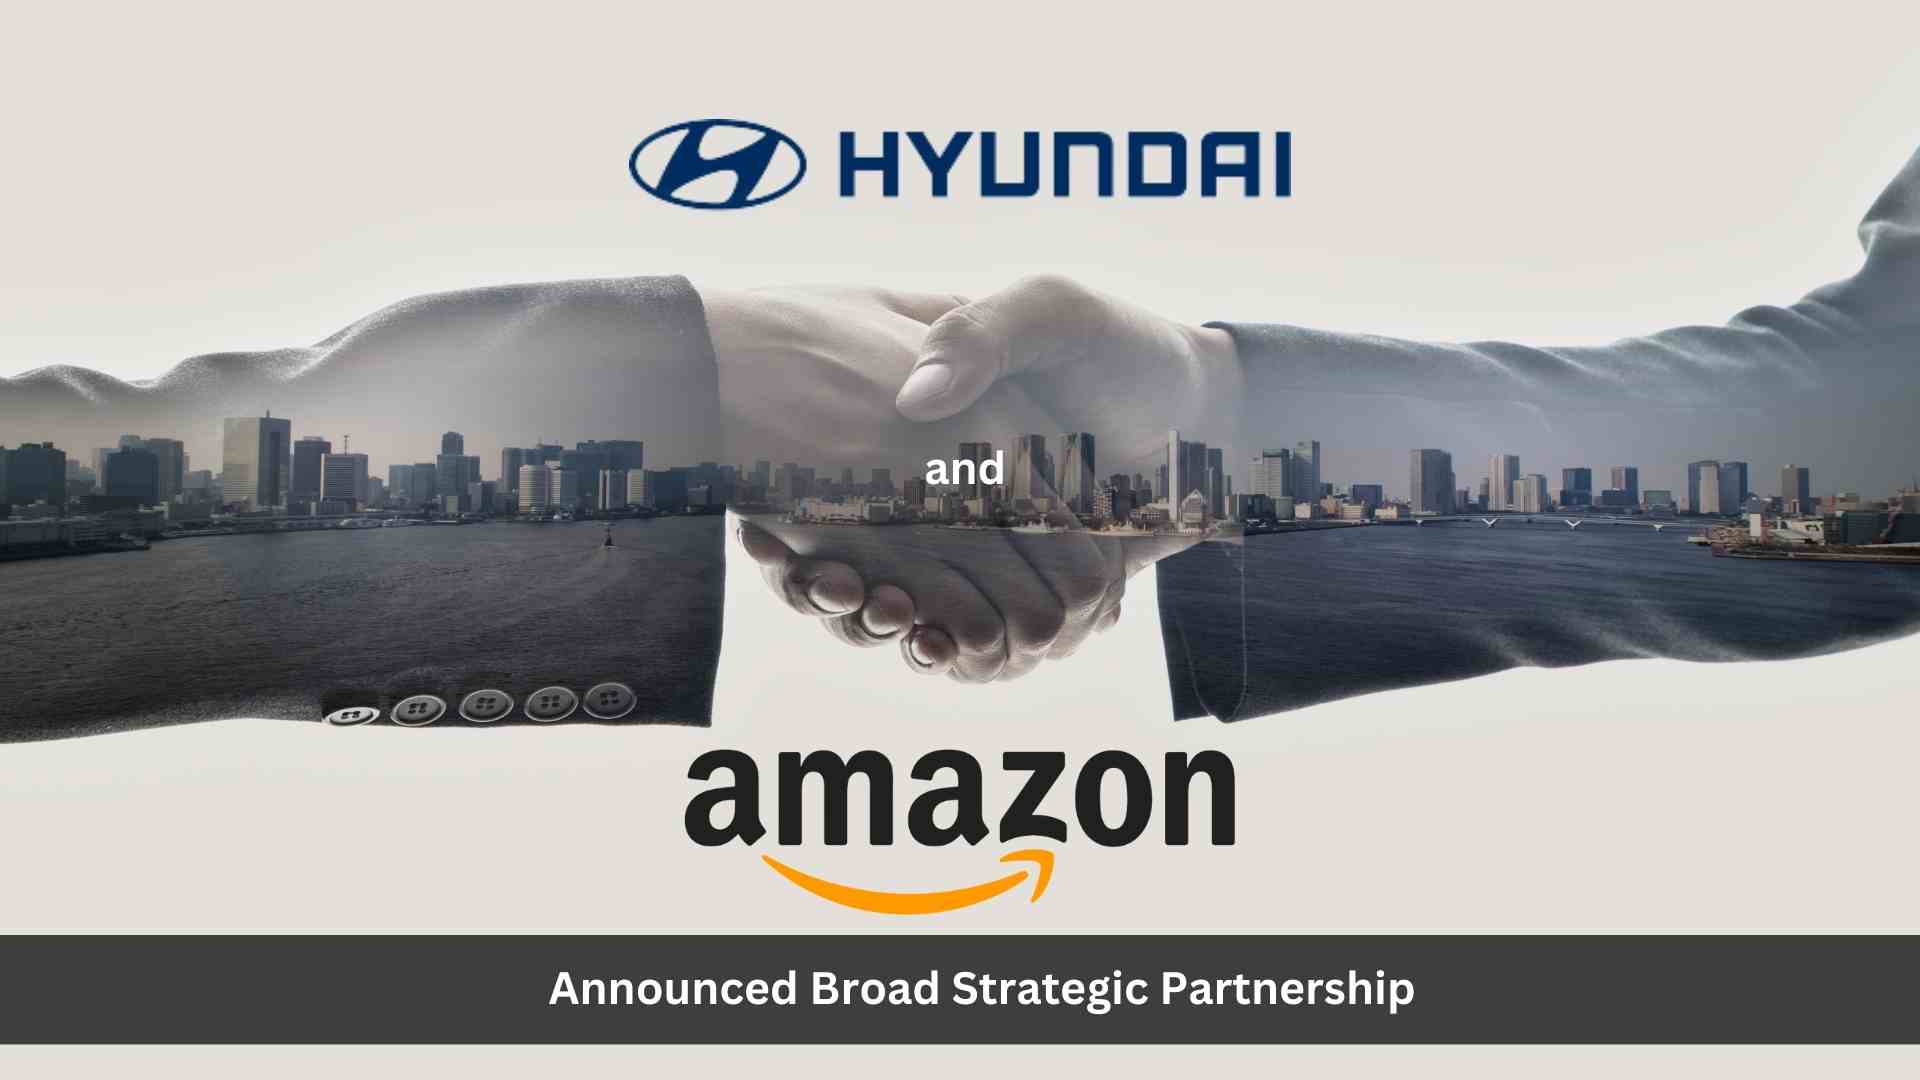 Hyundai and Amazon partner to deliver innovative customer experiences and cloud transformation